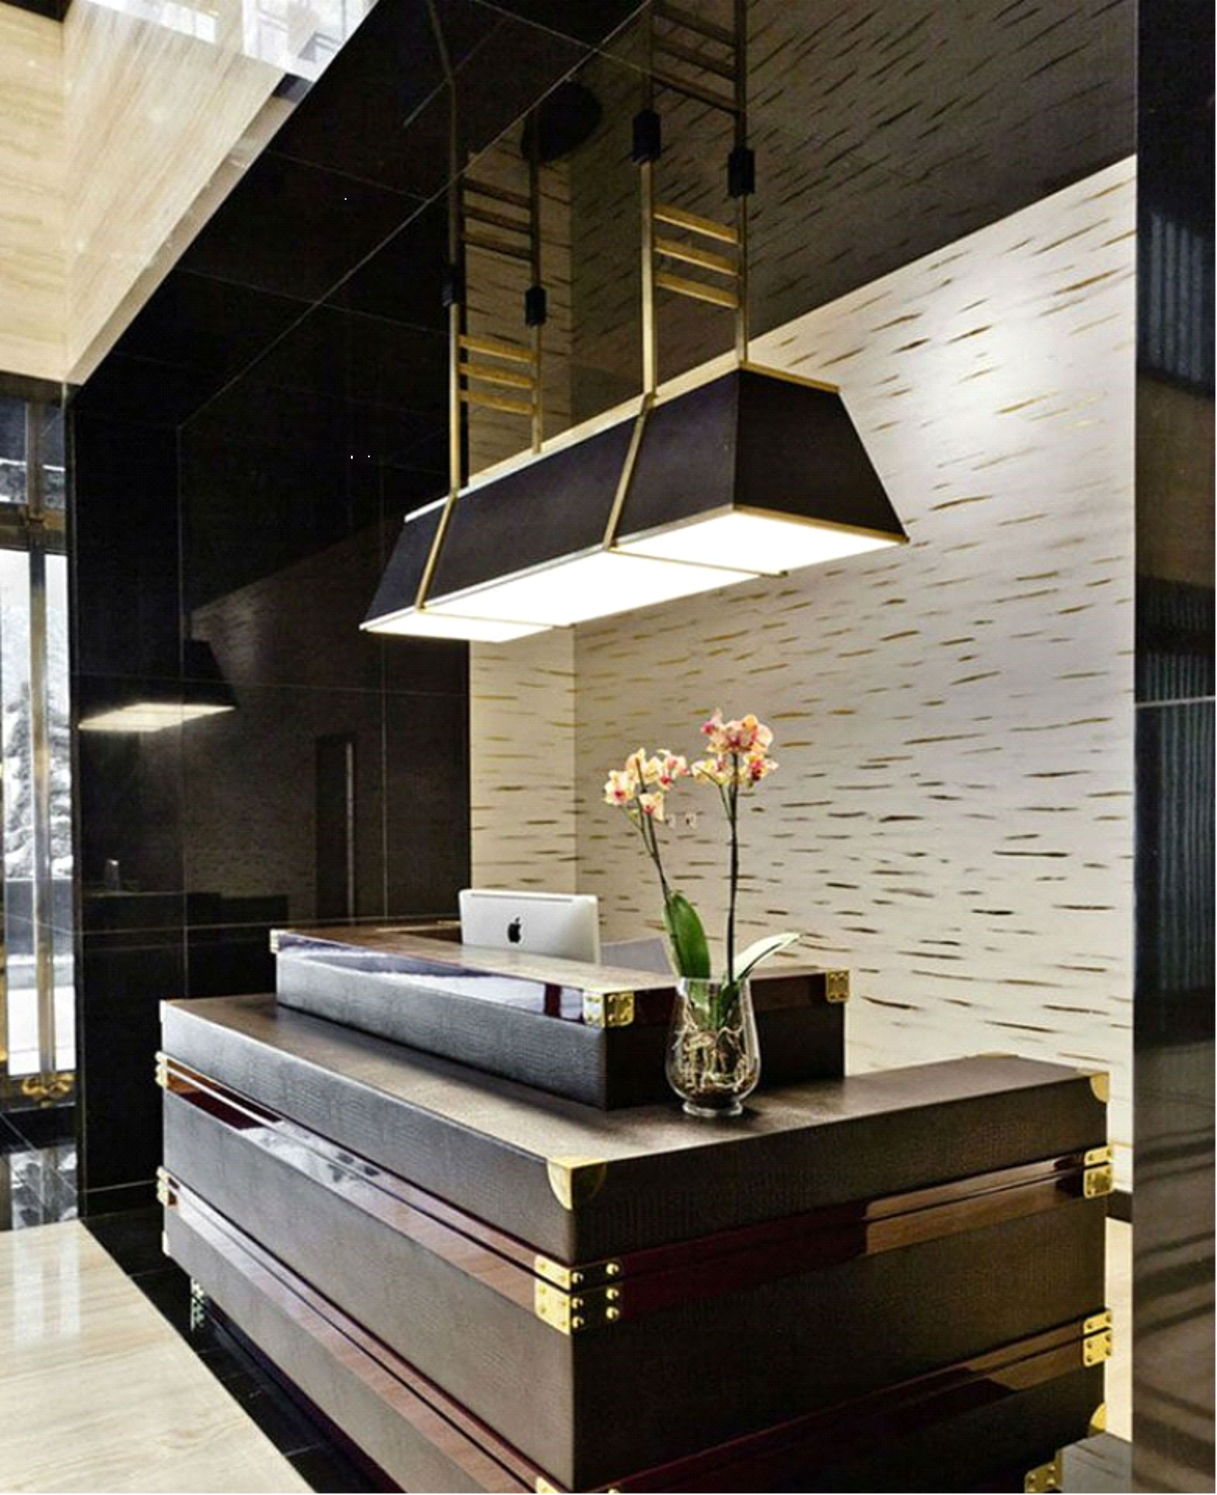 Design Inspiration for Your Modern Office Reception Space